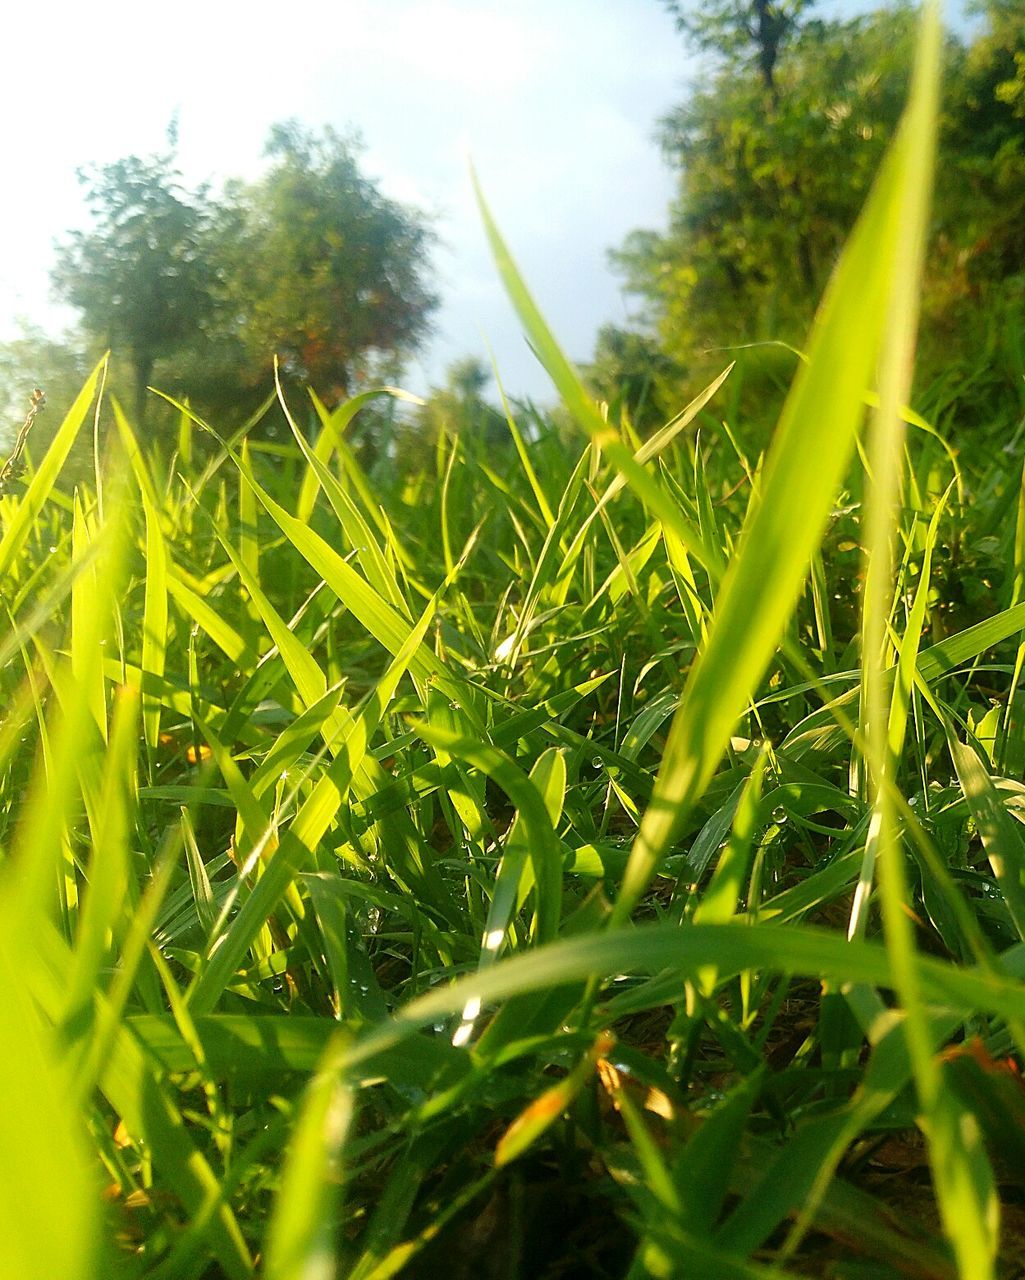 CLOSE-UP OF FRESH GREEN GRASS IN FIELD